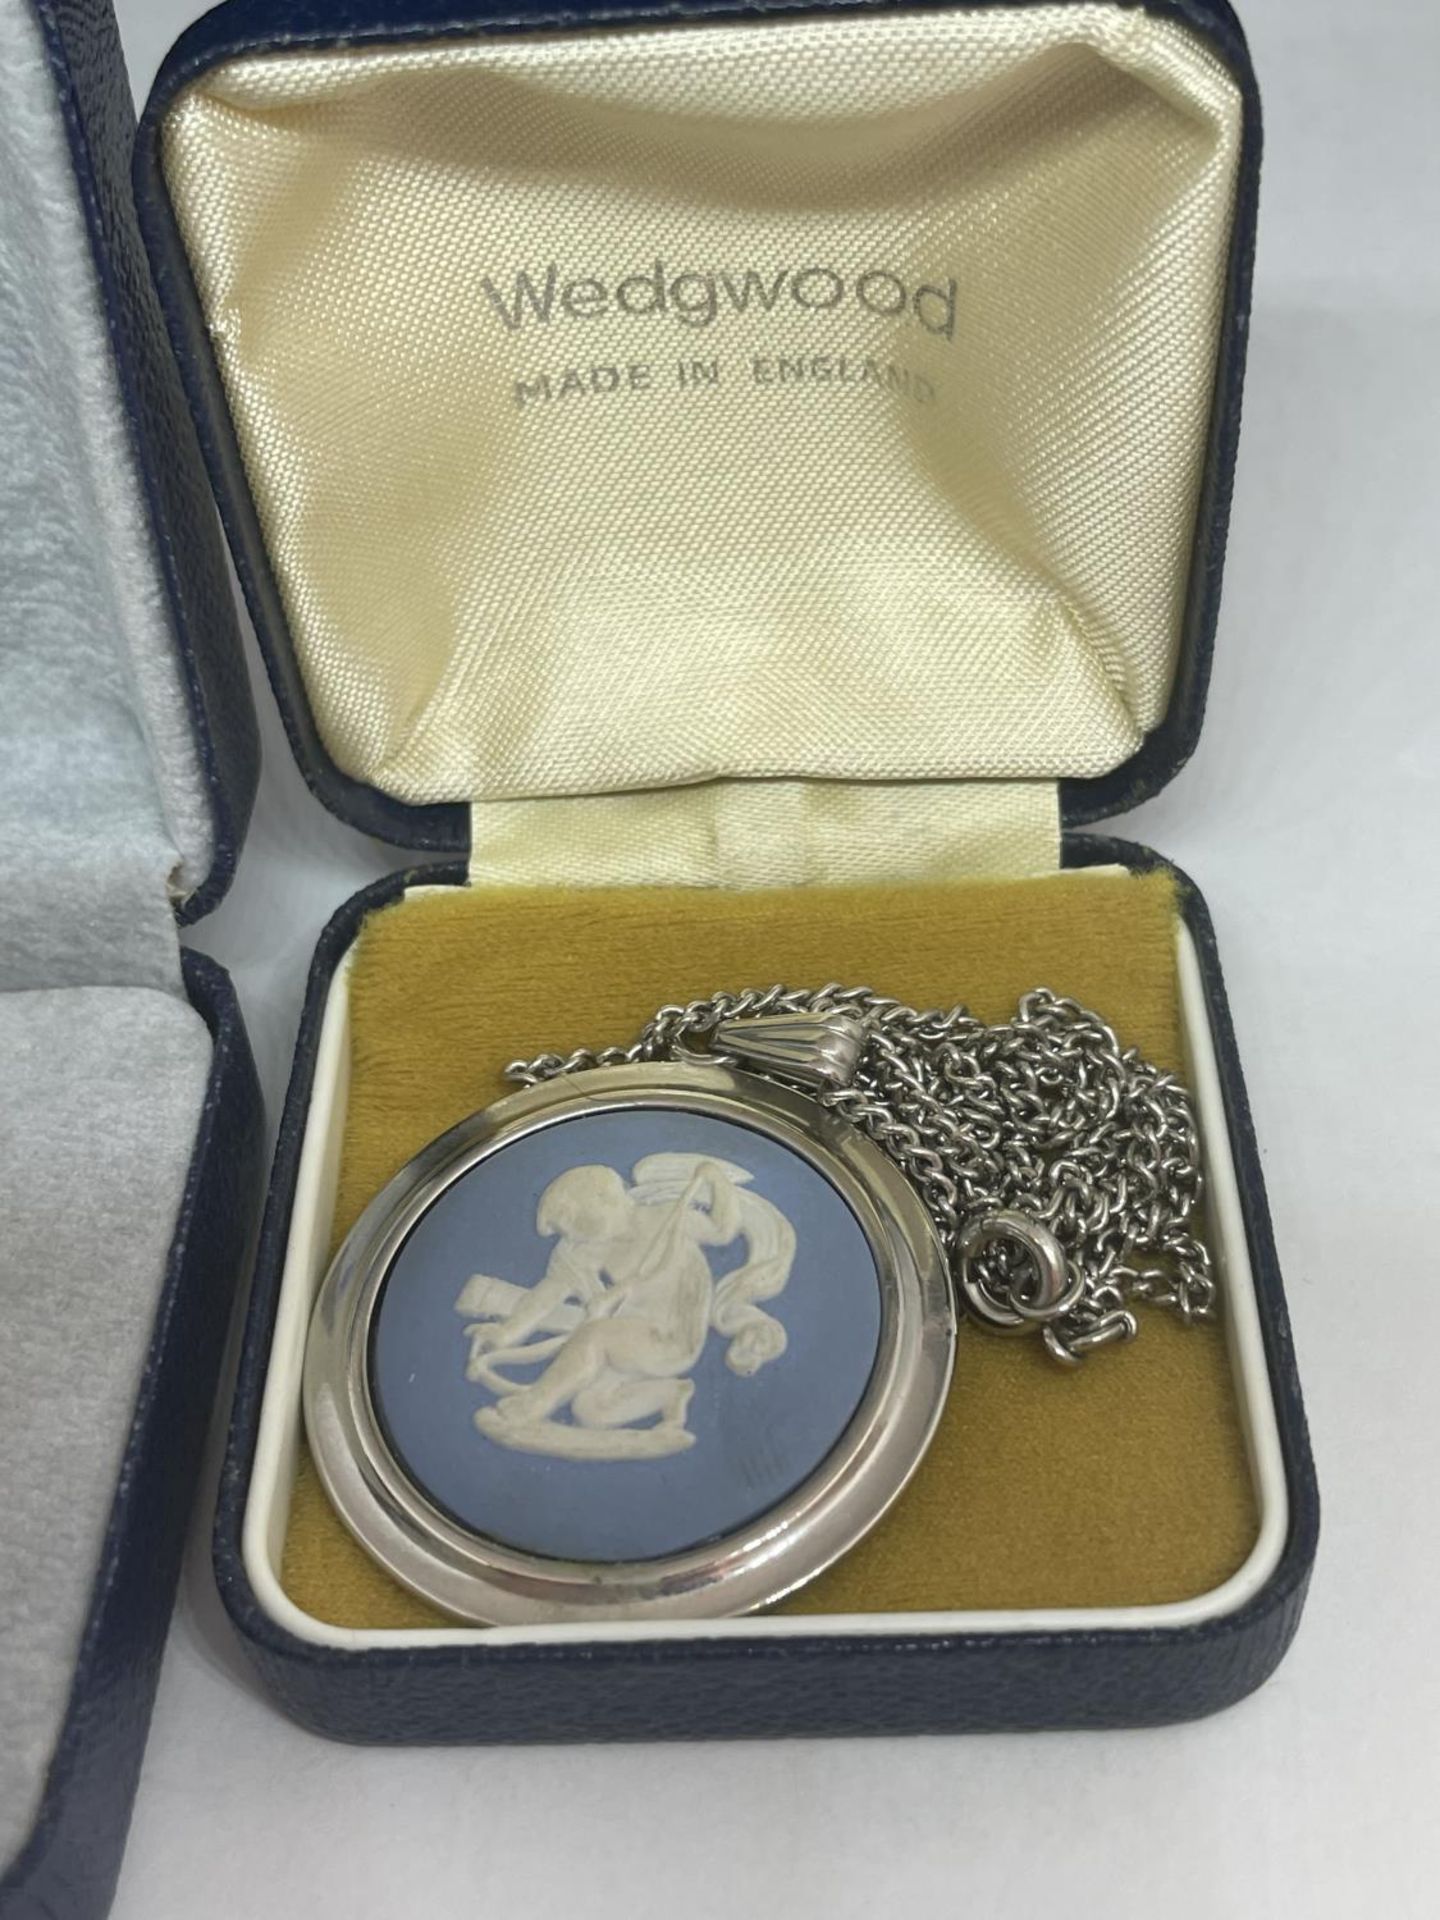 TWO BOXED WEDGWOOD JASPER WARE ITEMS TO INCLUDE A PINK BROOCH AND A BLUE PENDANT - Image 3 of 3